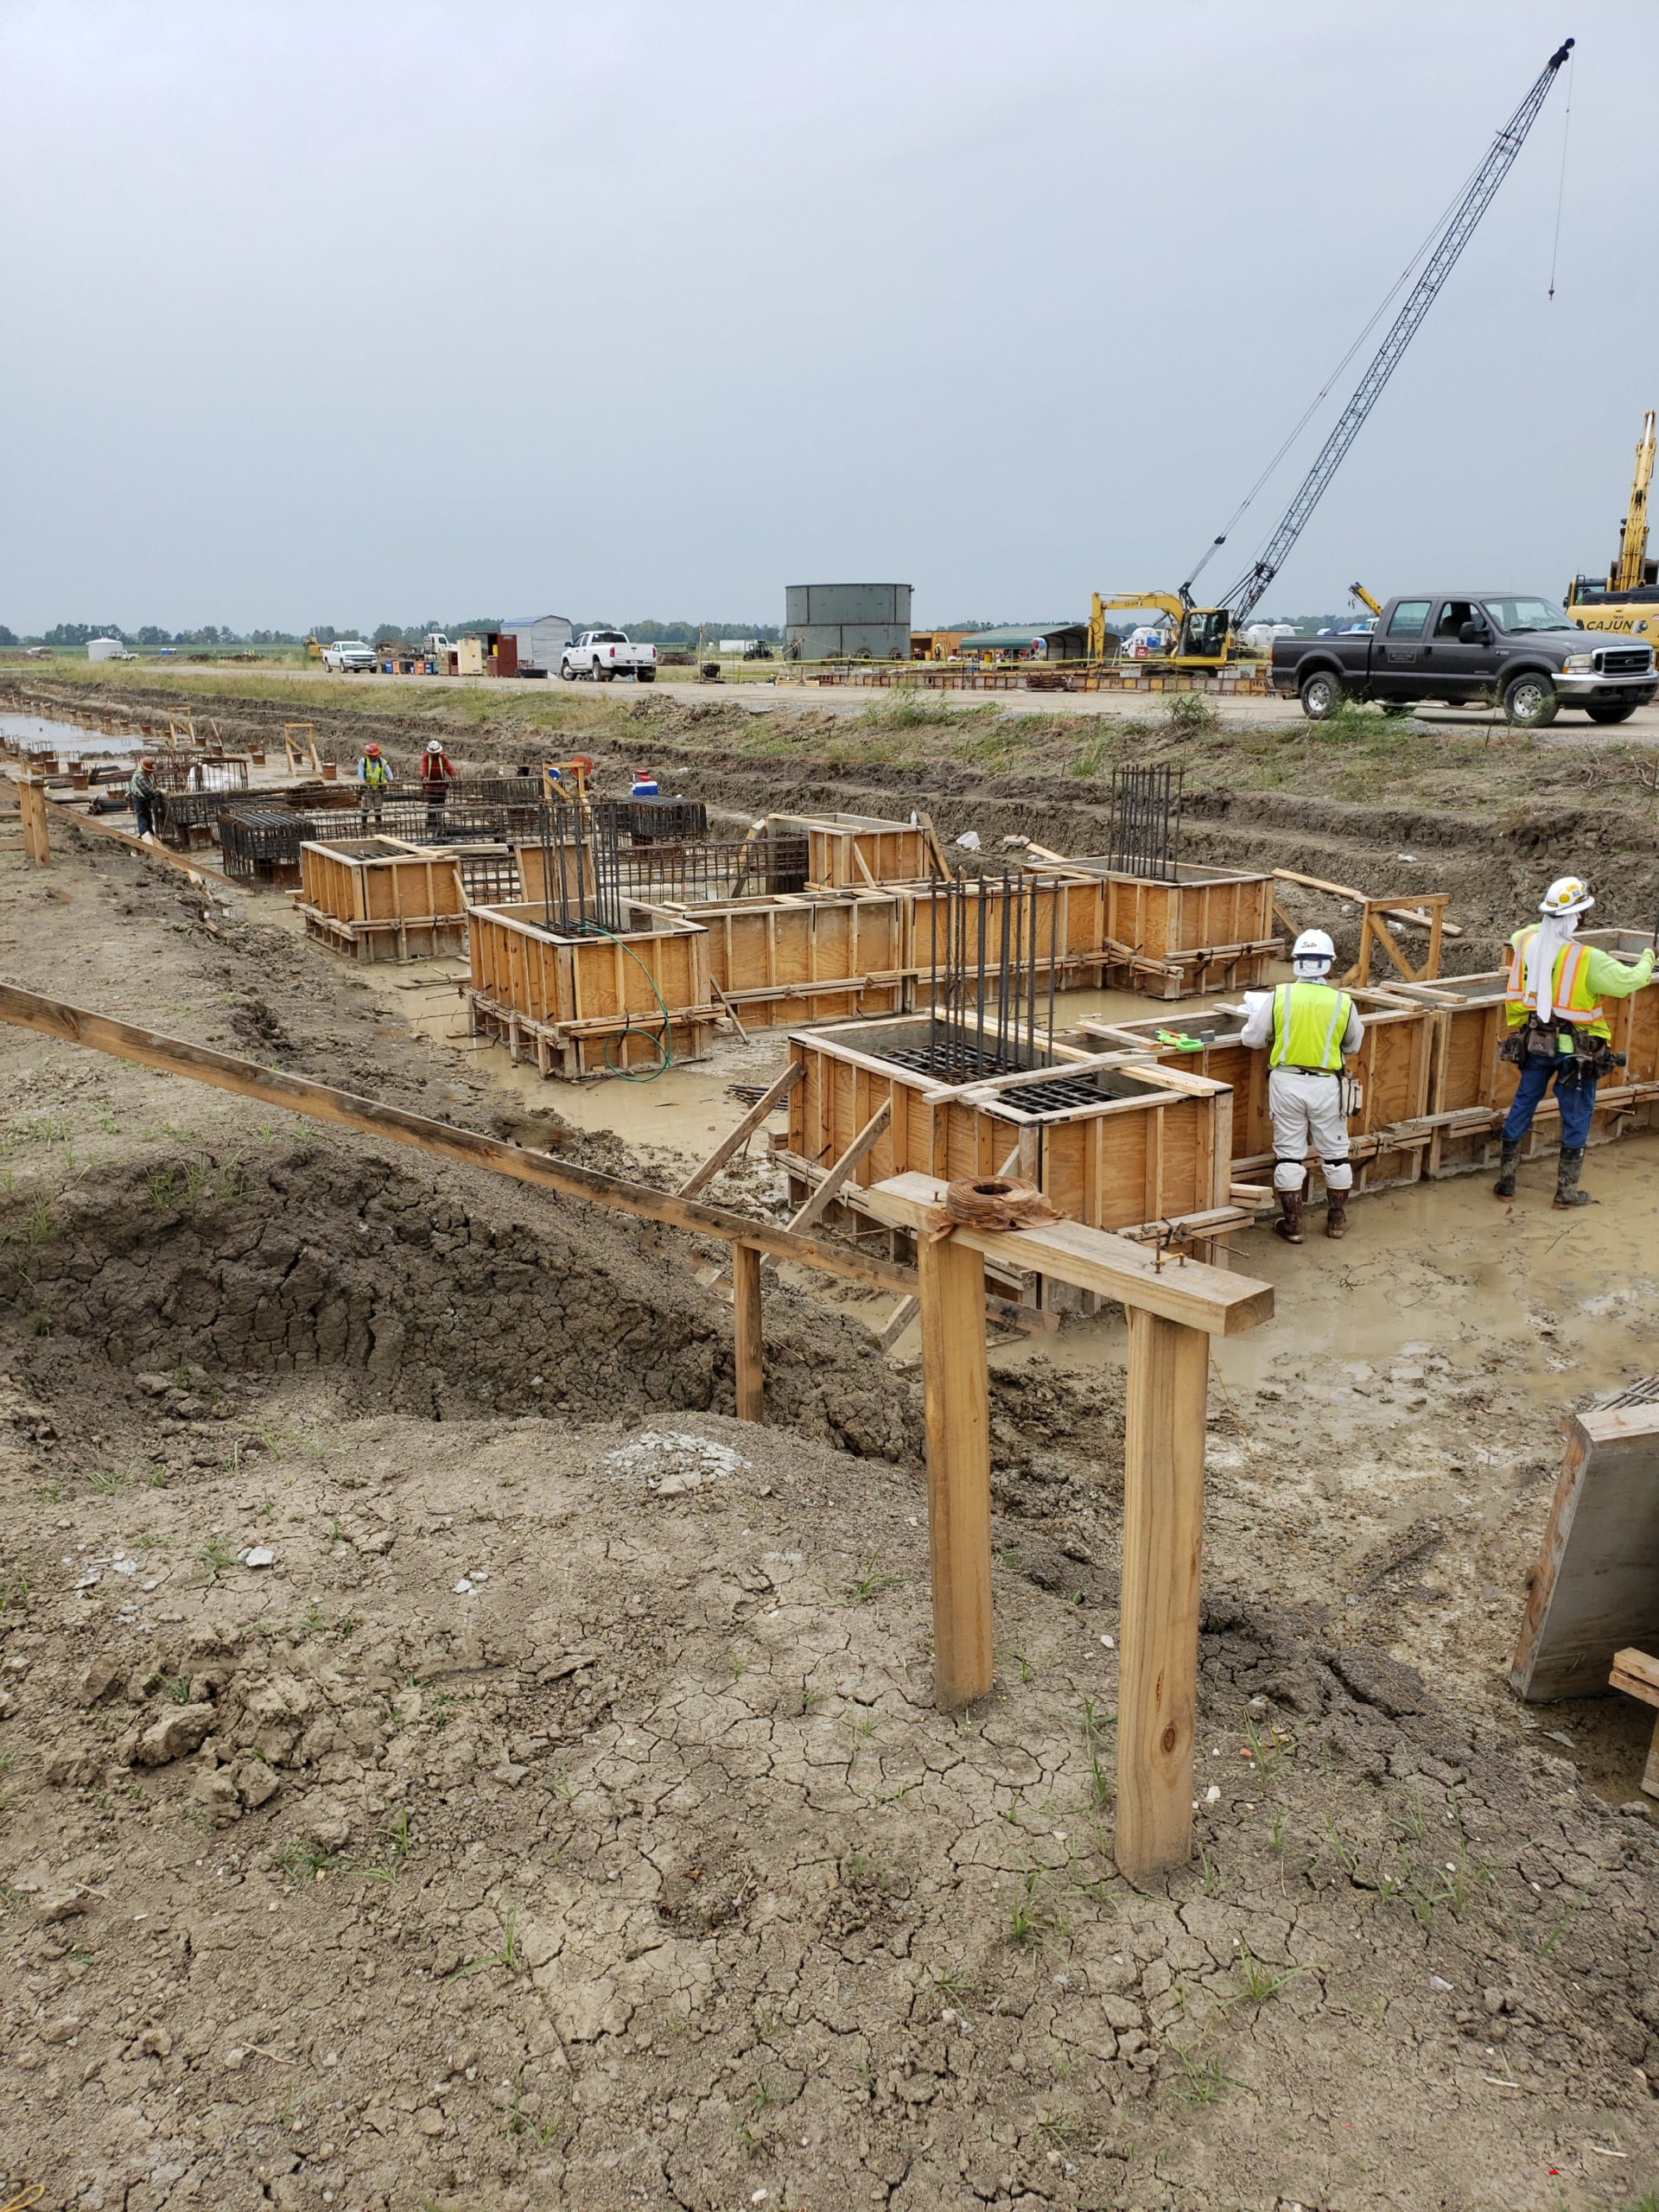 Boh Bros workers constructing foundations for piles on the Shintech Pile Project.